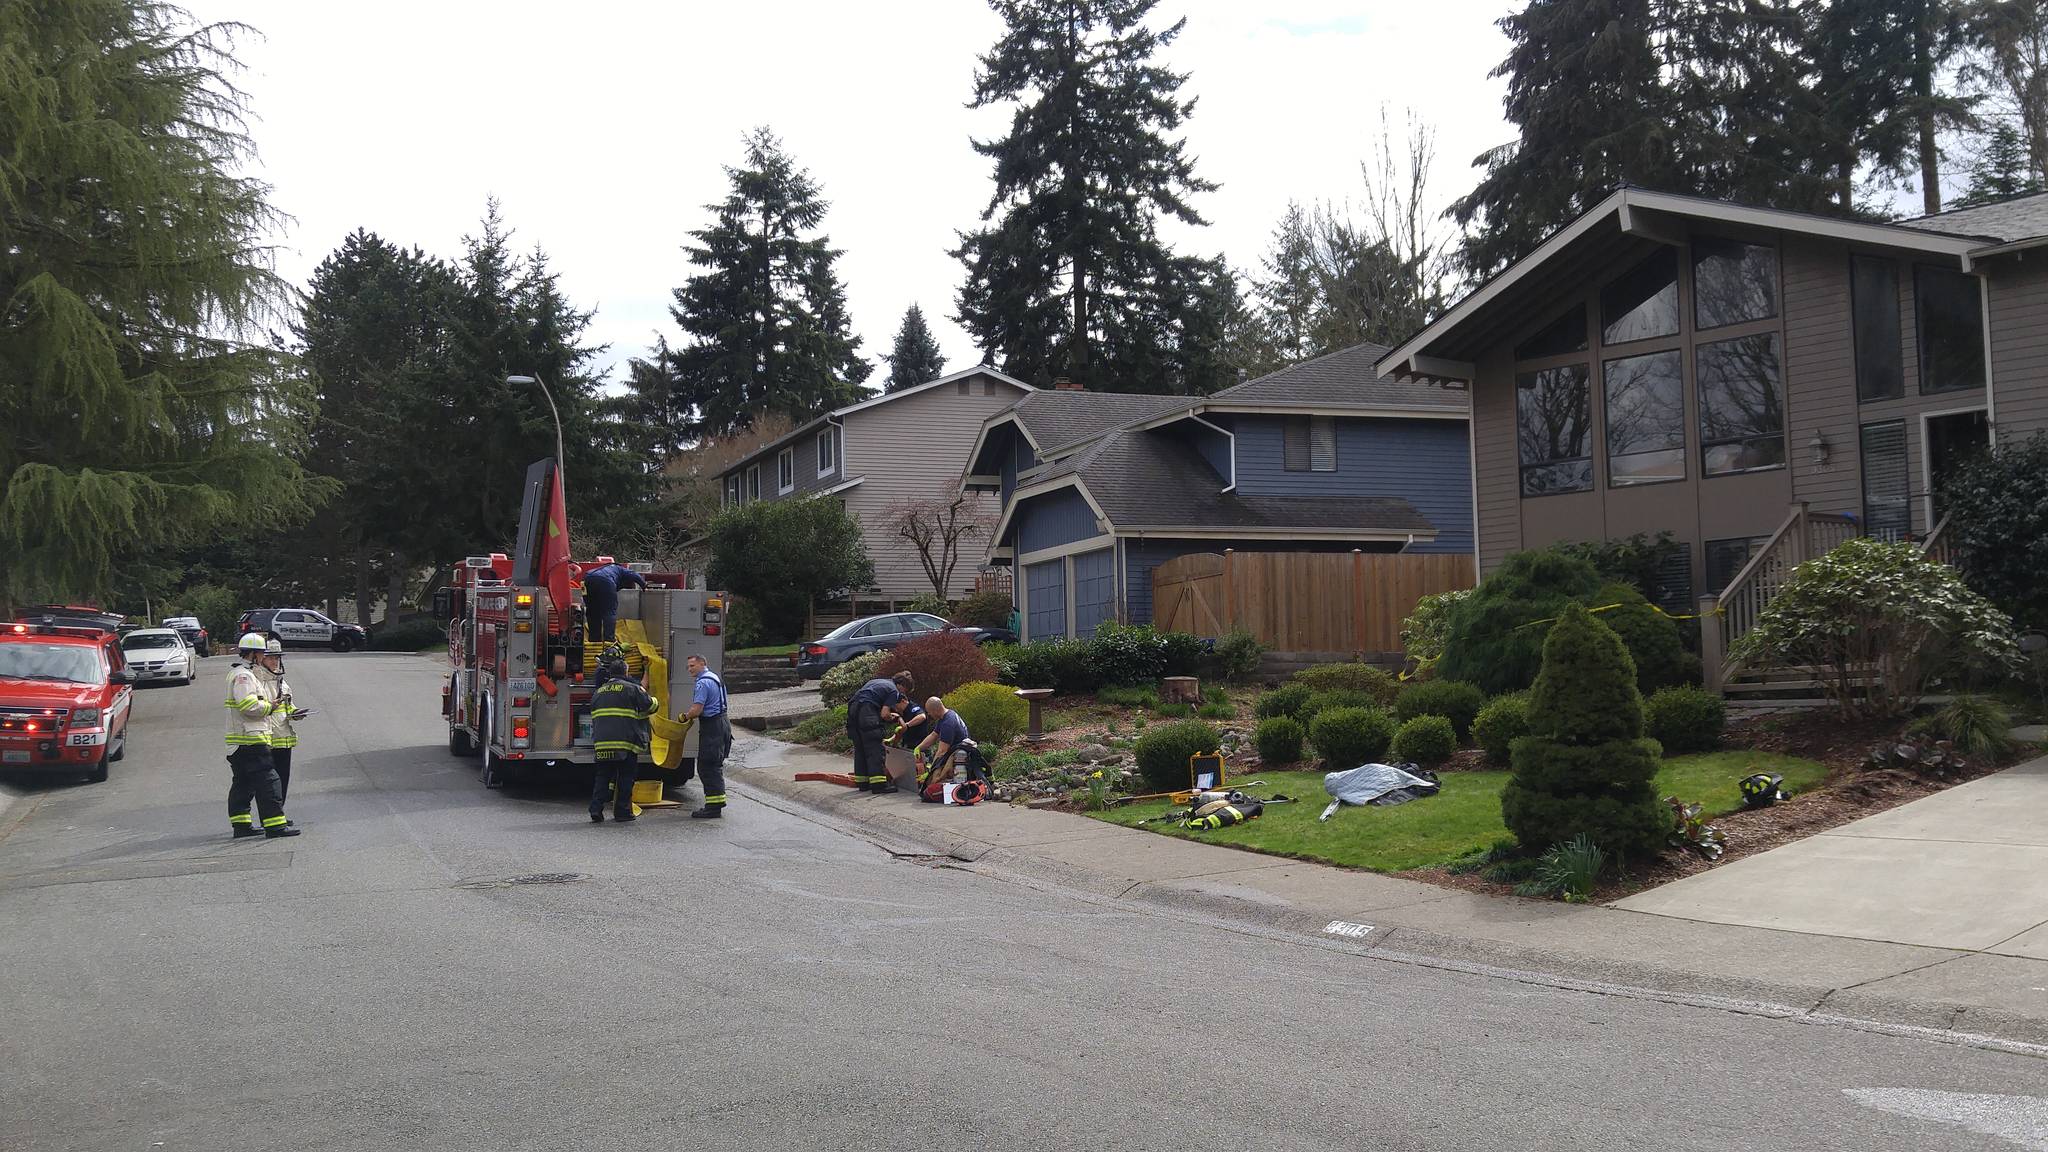 Kirkland firefighters rescued a woman from the house on the far right after a fire broke out in the kitchen on Thursday. MATT PHELPS/Kirkland Reporter